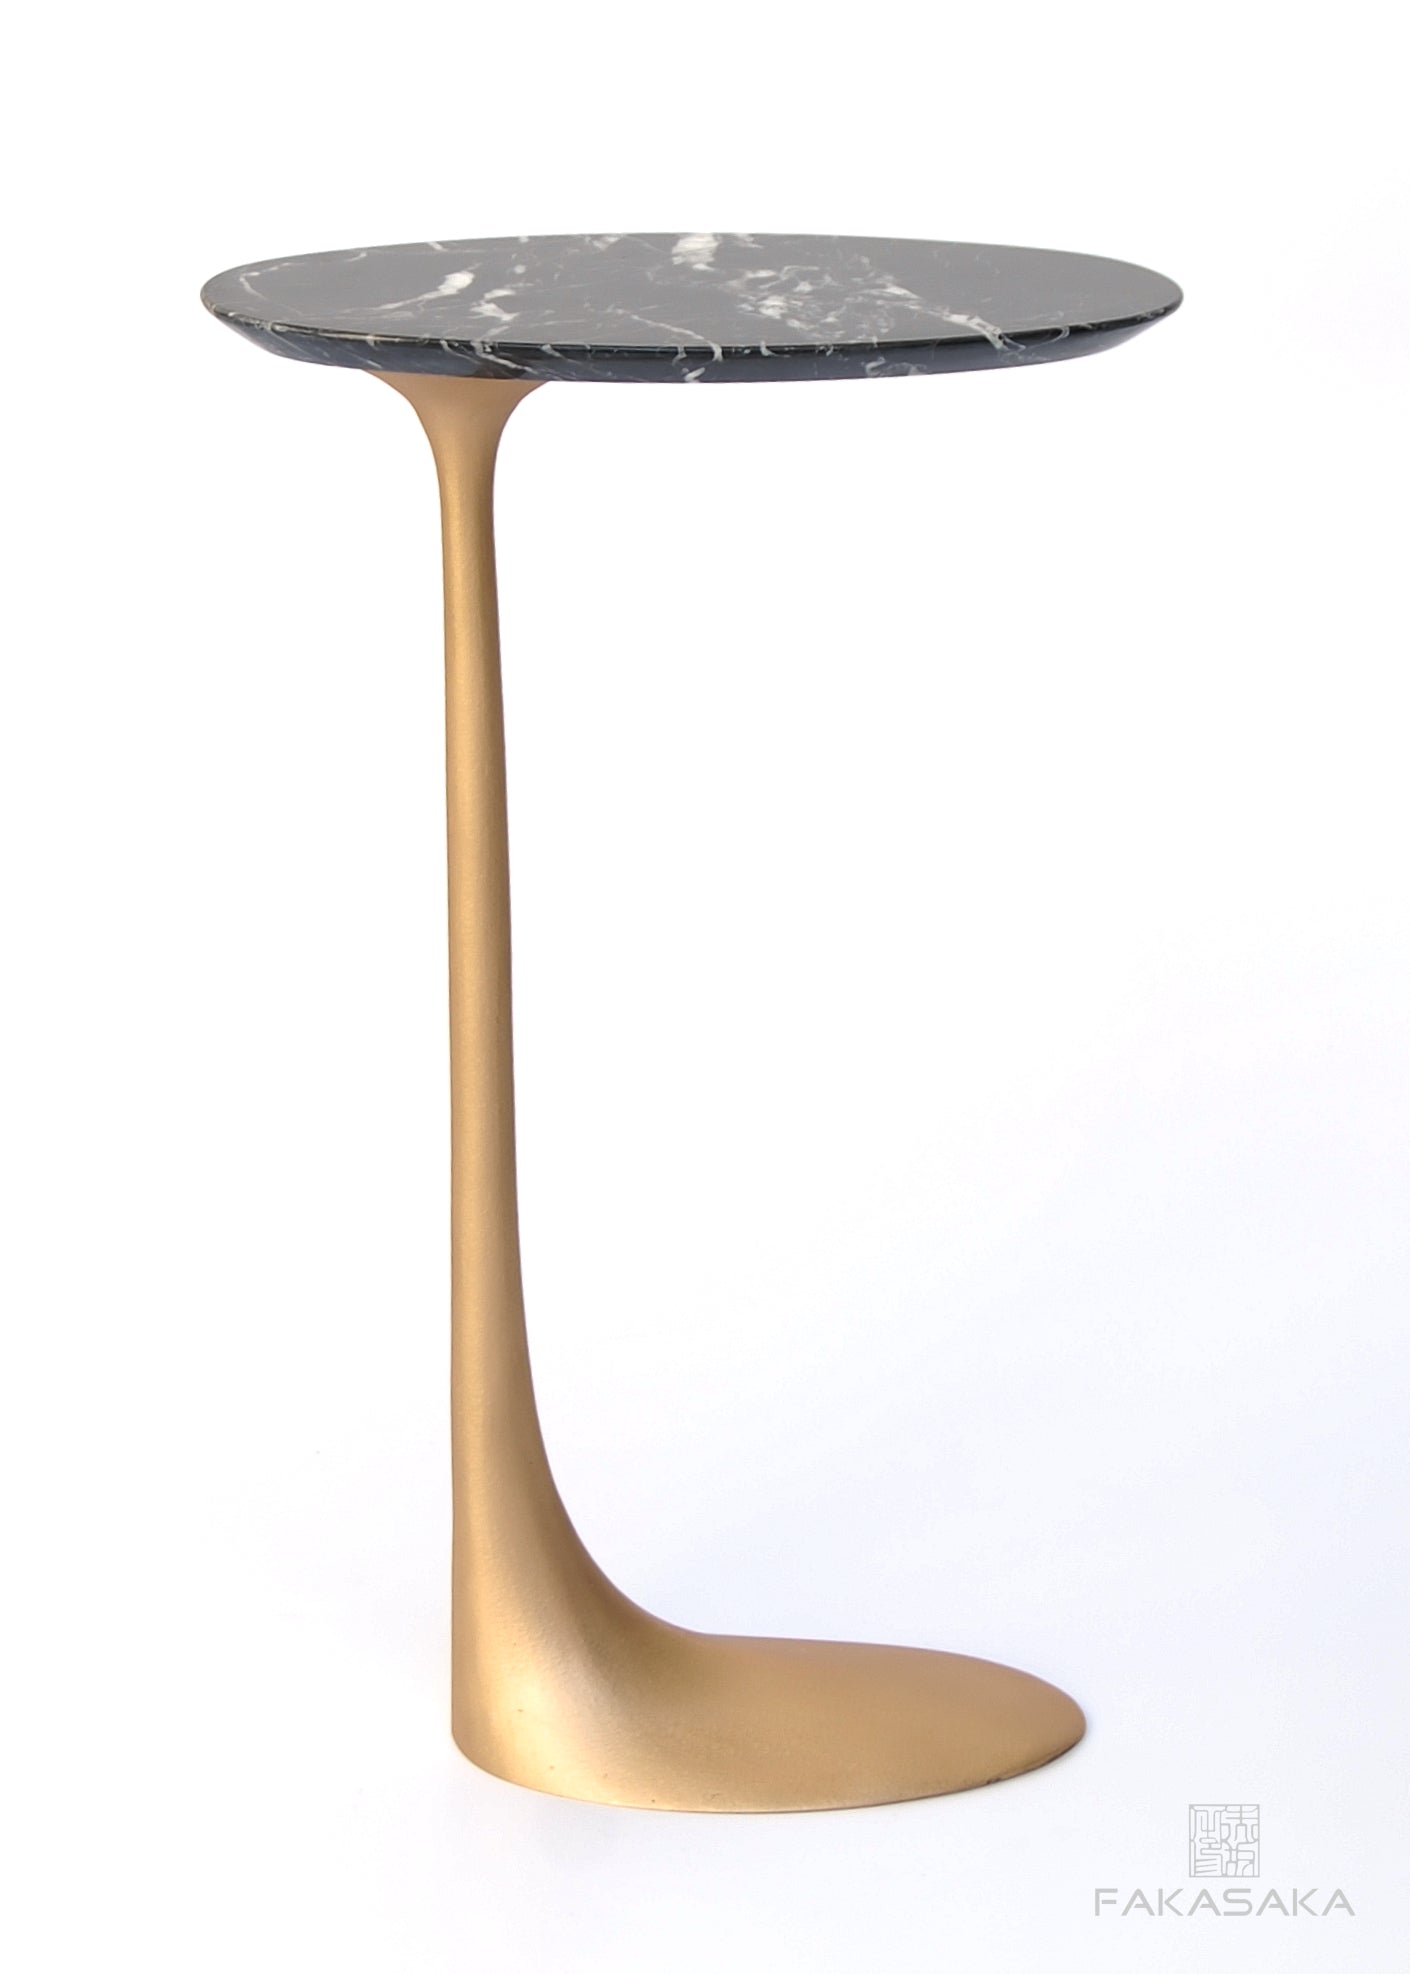 KEITH DRINK TABLE<br><br>NERO MARQUINA MARBLE<br>POLISHED TEXTURED BRONZE